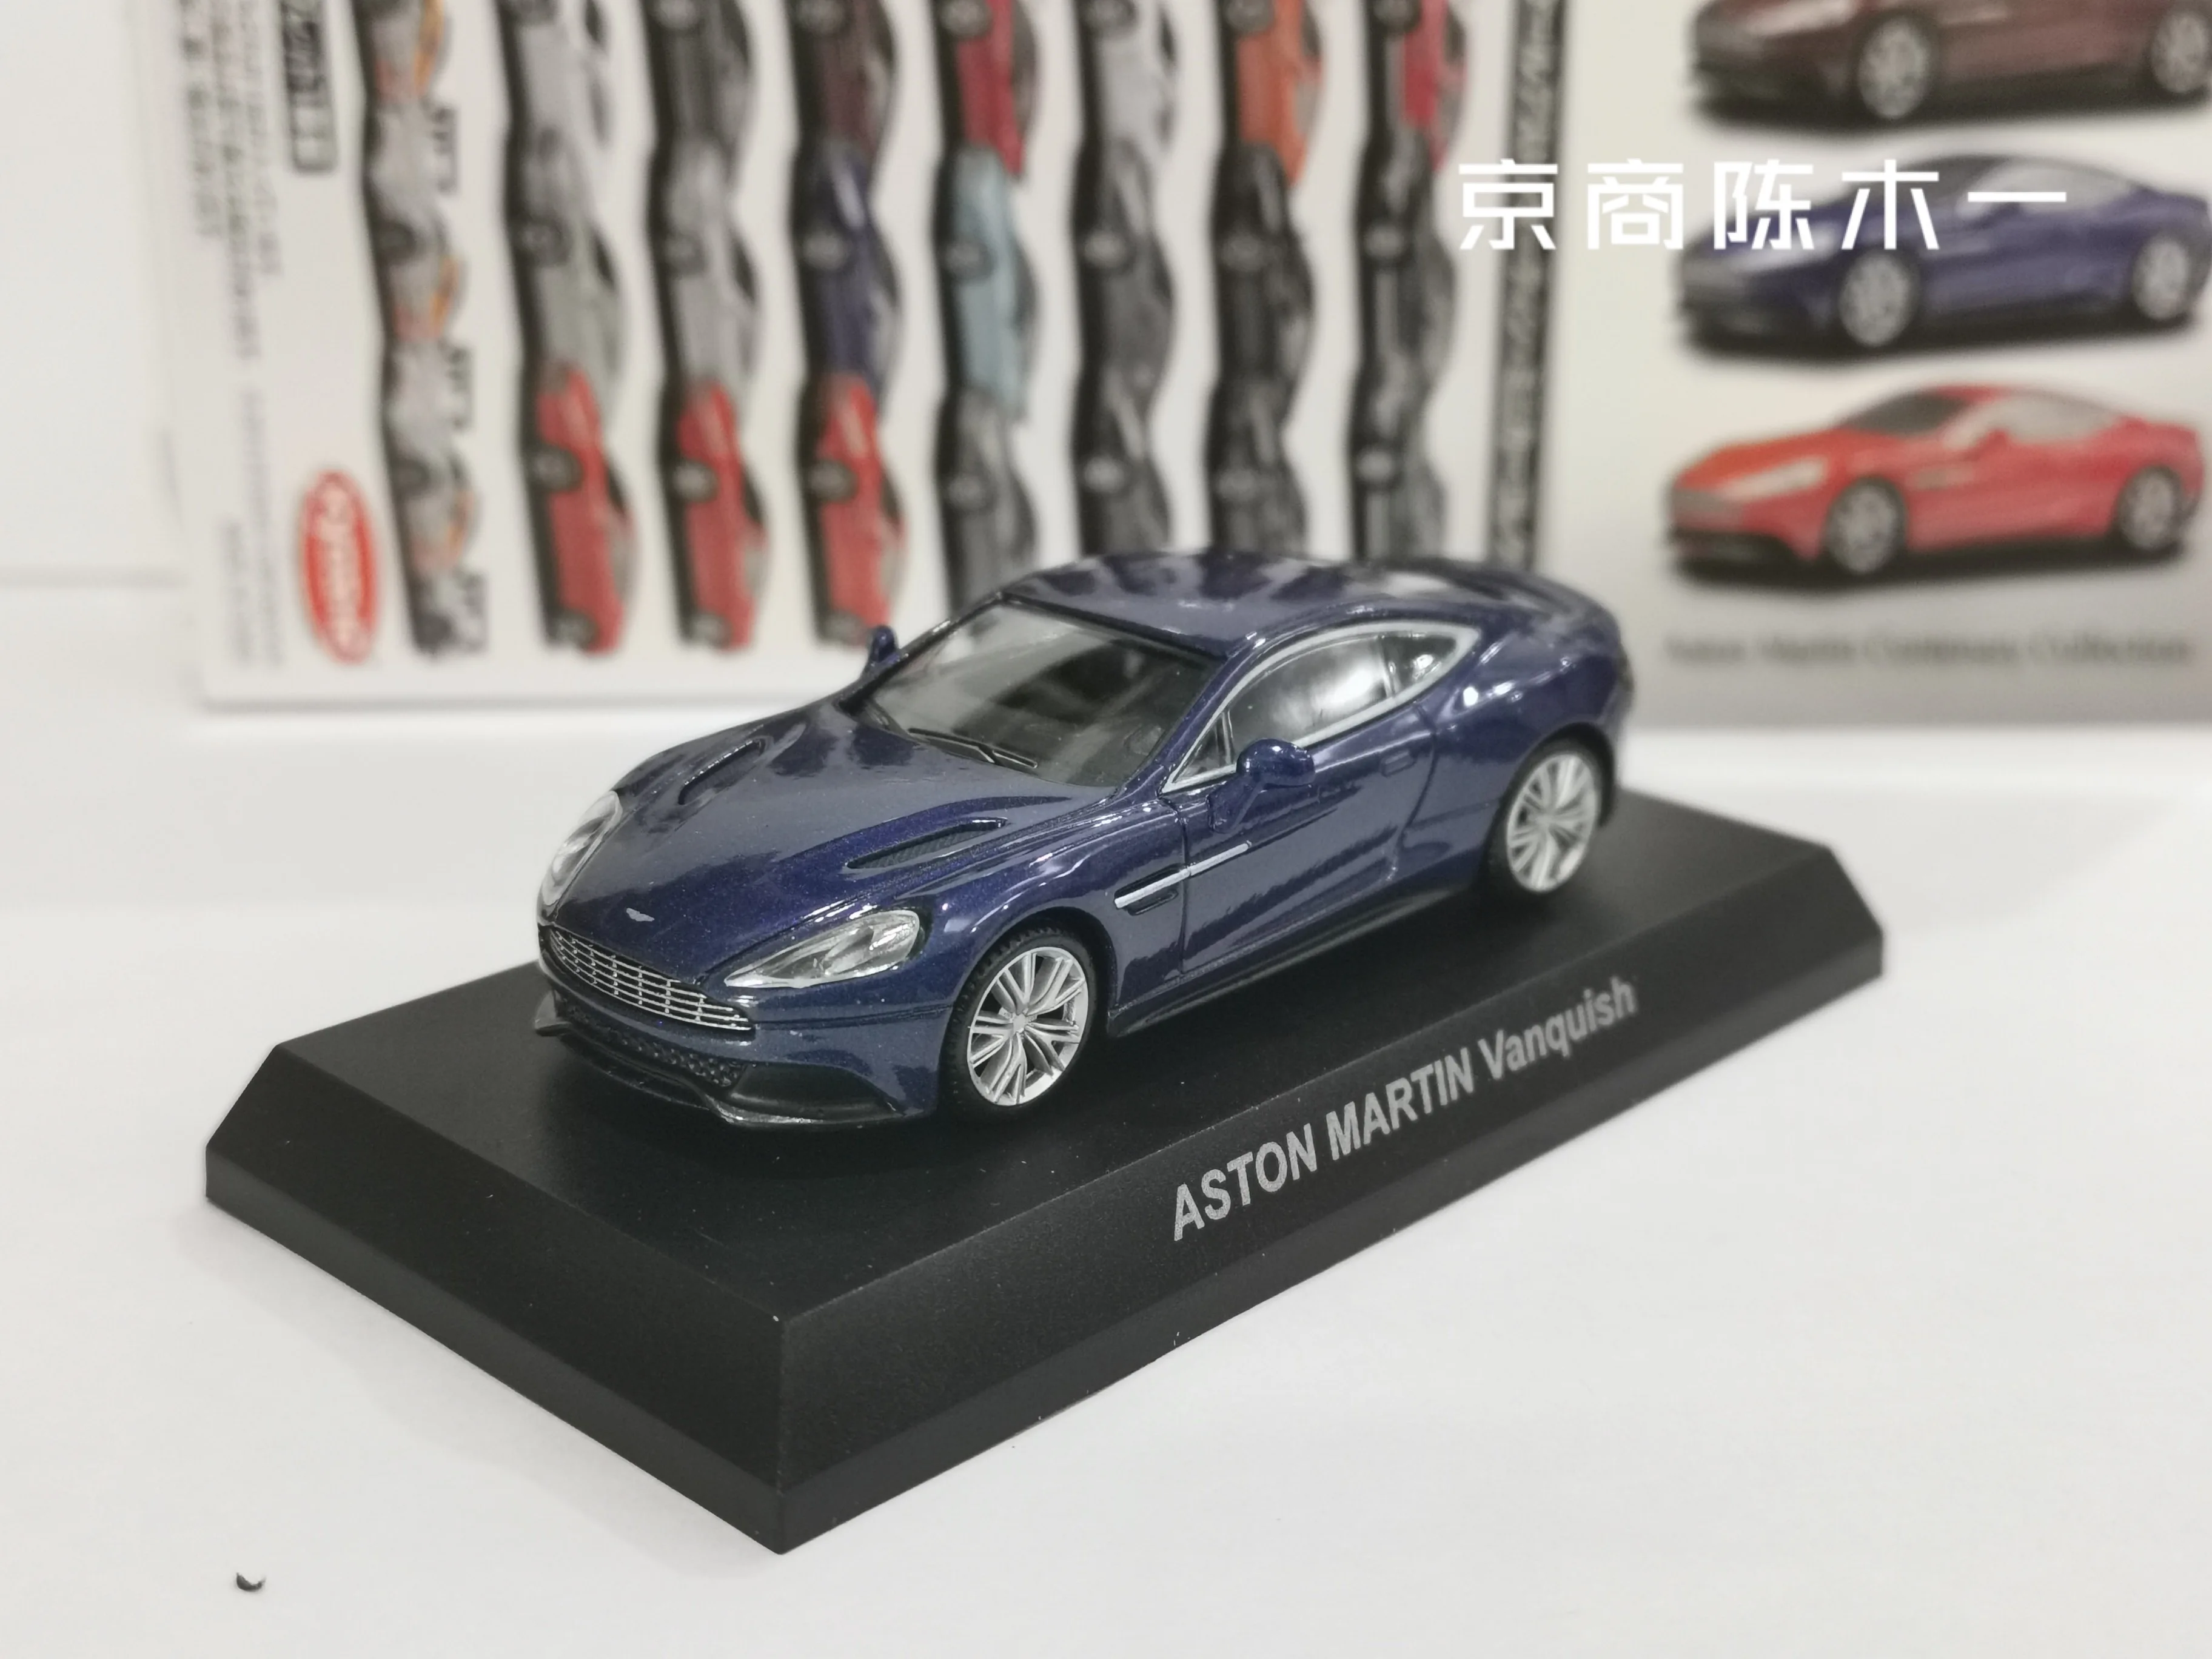 1-64-kyosho-aston-martin-vanquish-lm-f1-racing-collection-of-die-cast-alloy-car-decoration-model-toys